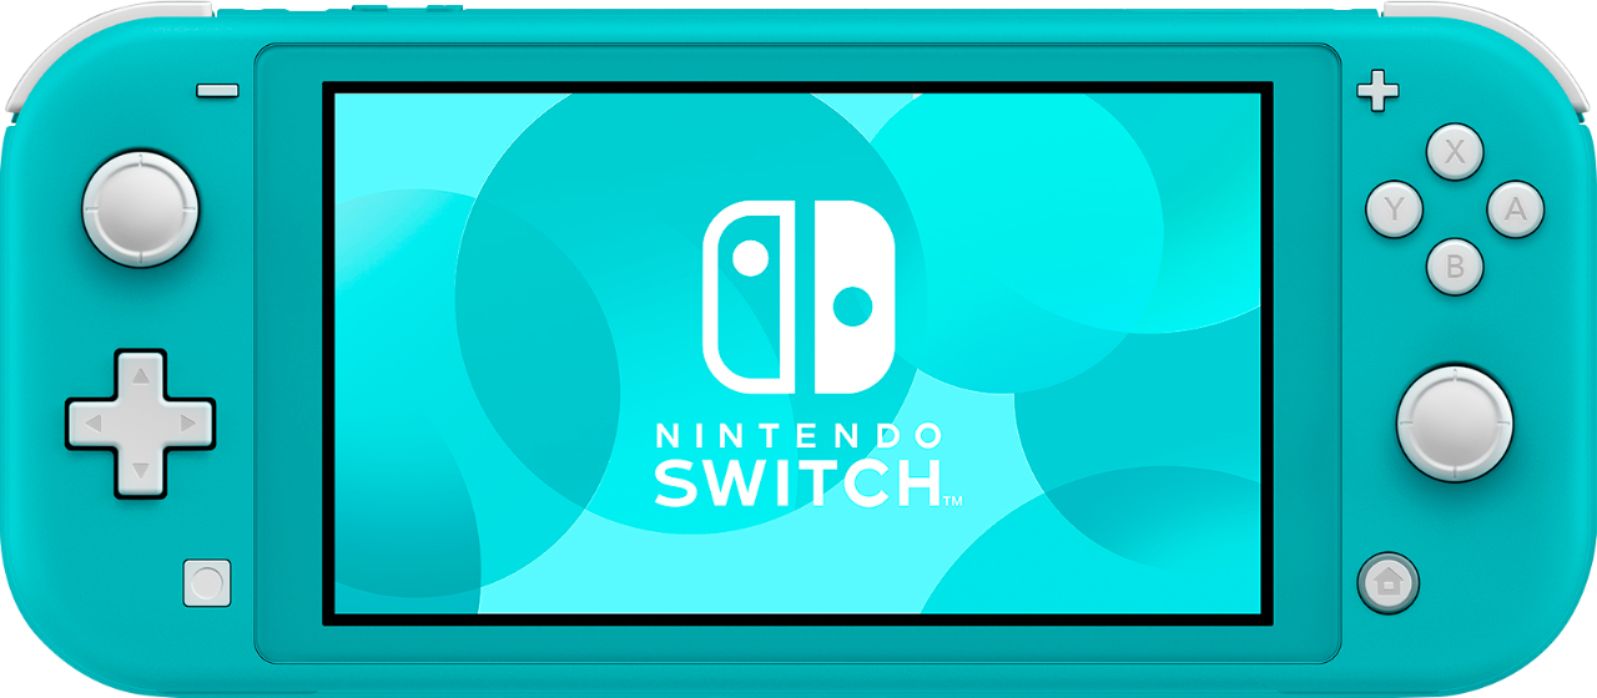 Nintendo Switch Lite Turquoise with Xenoblade Chronicles 3 & Mytrix Screen Protector